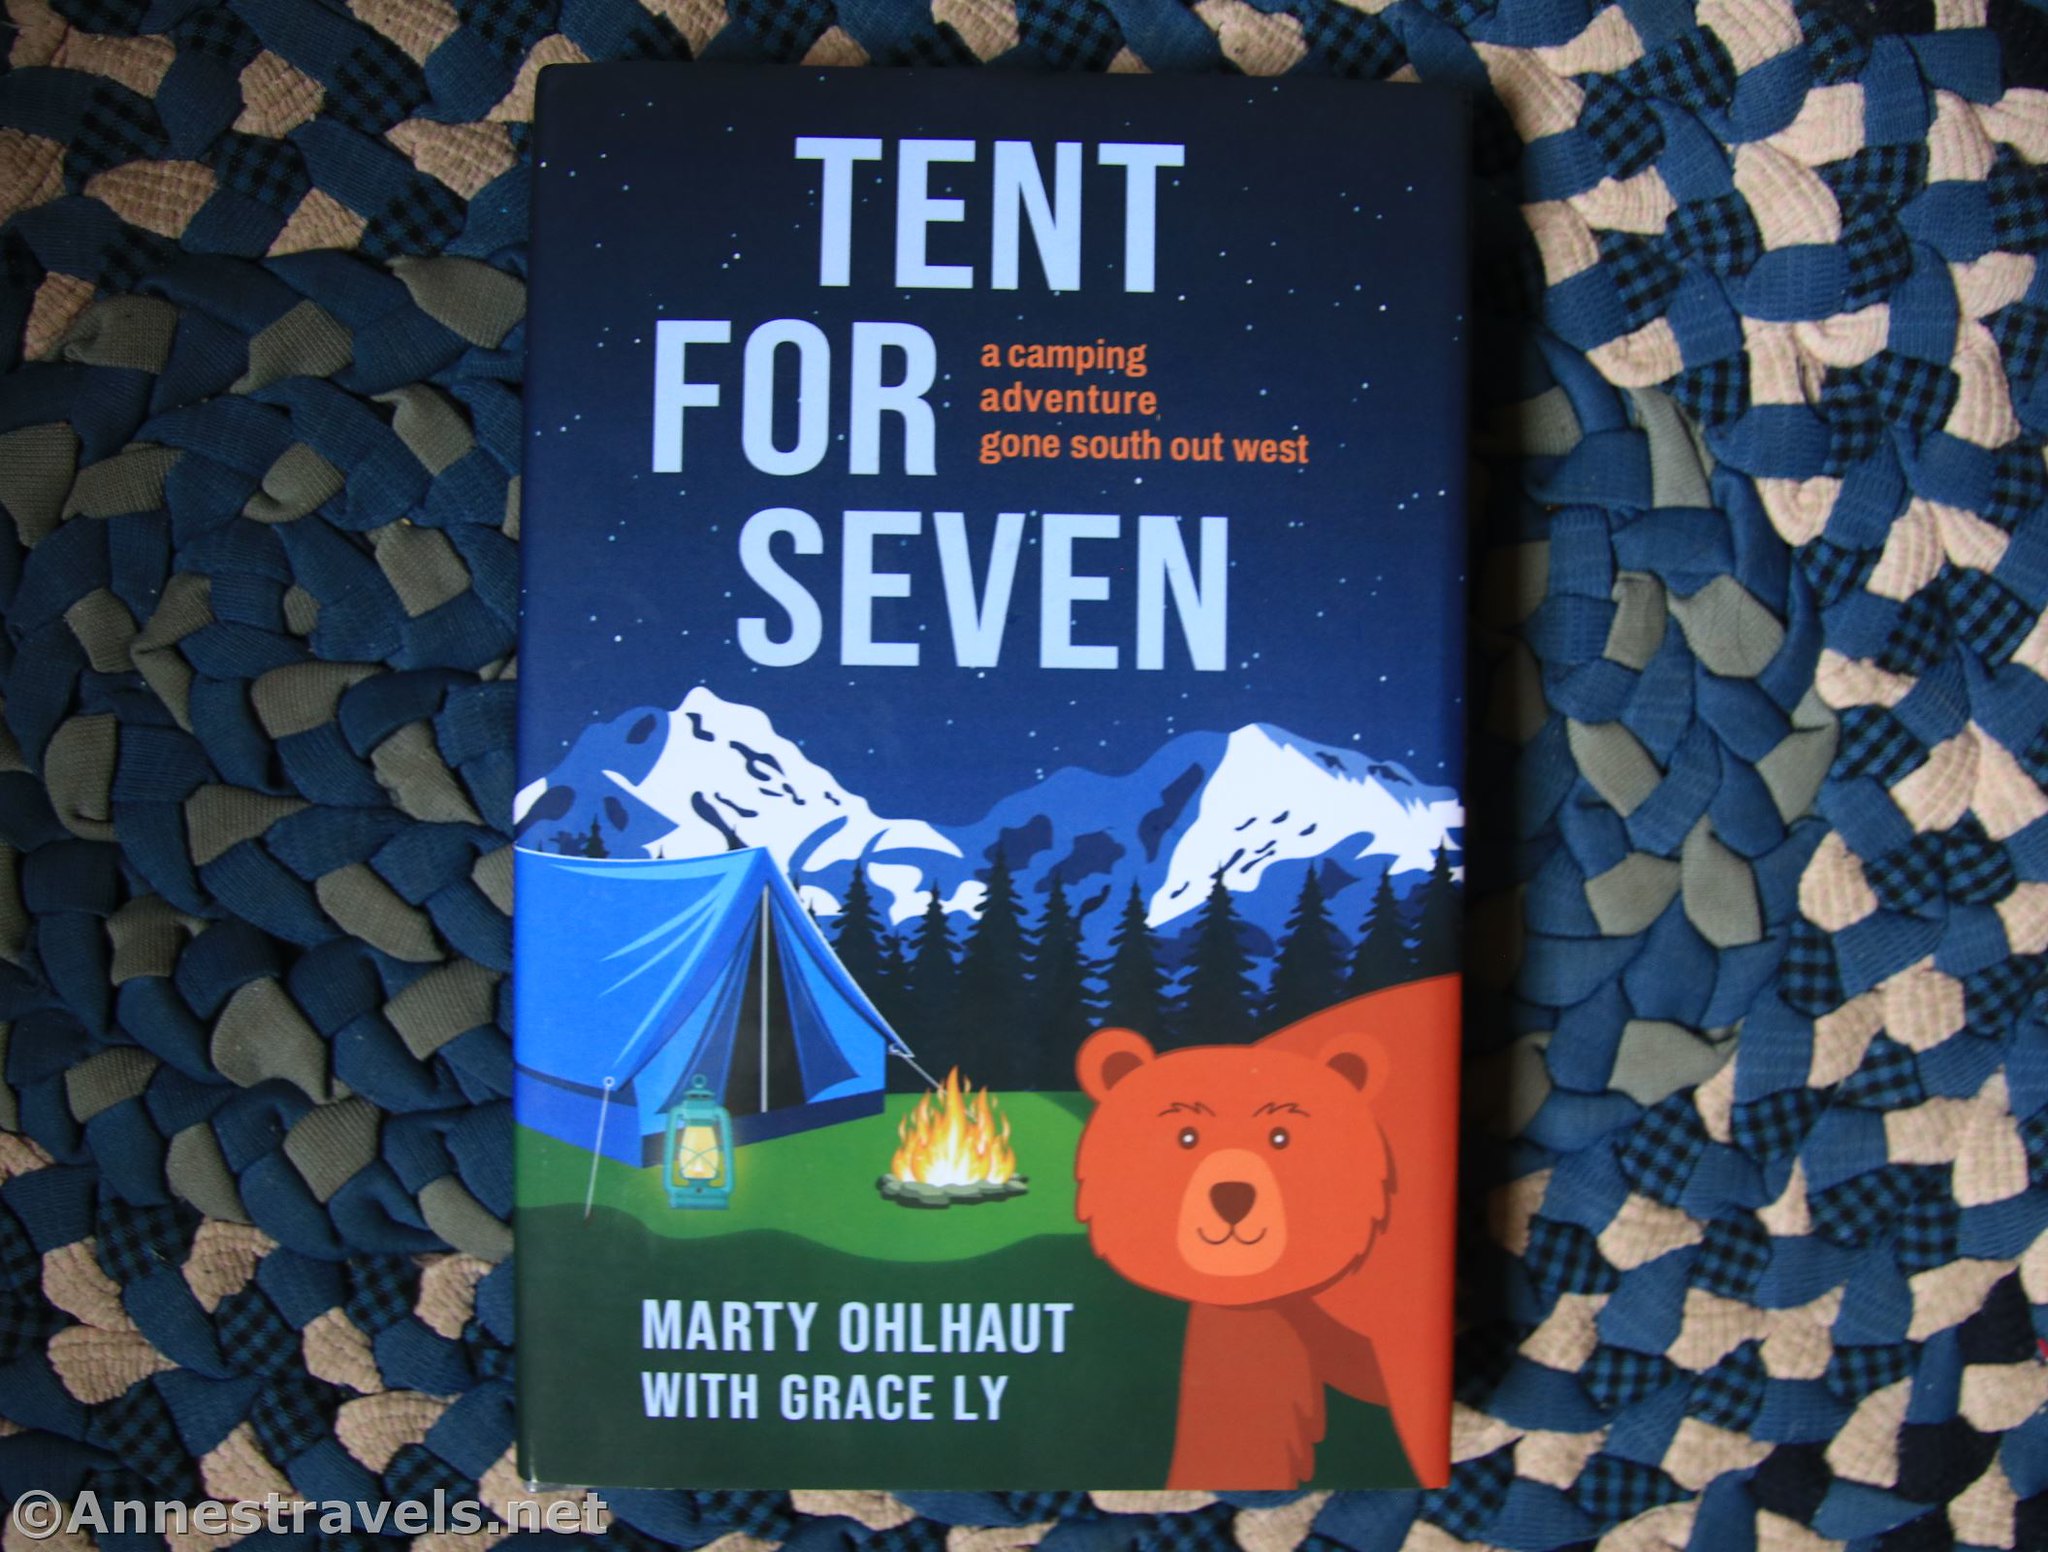 Tent for Seven by Marty Ohlhaut and Grace Ly